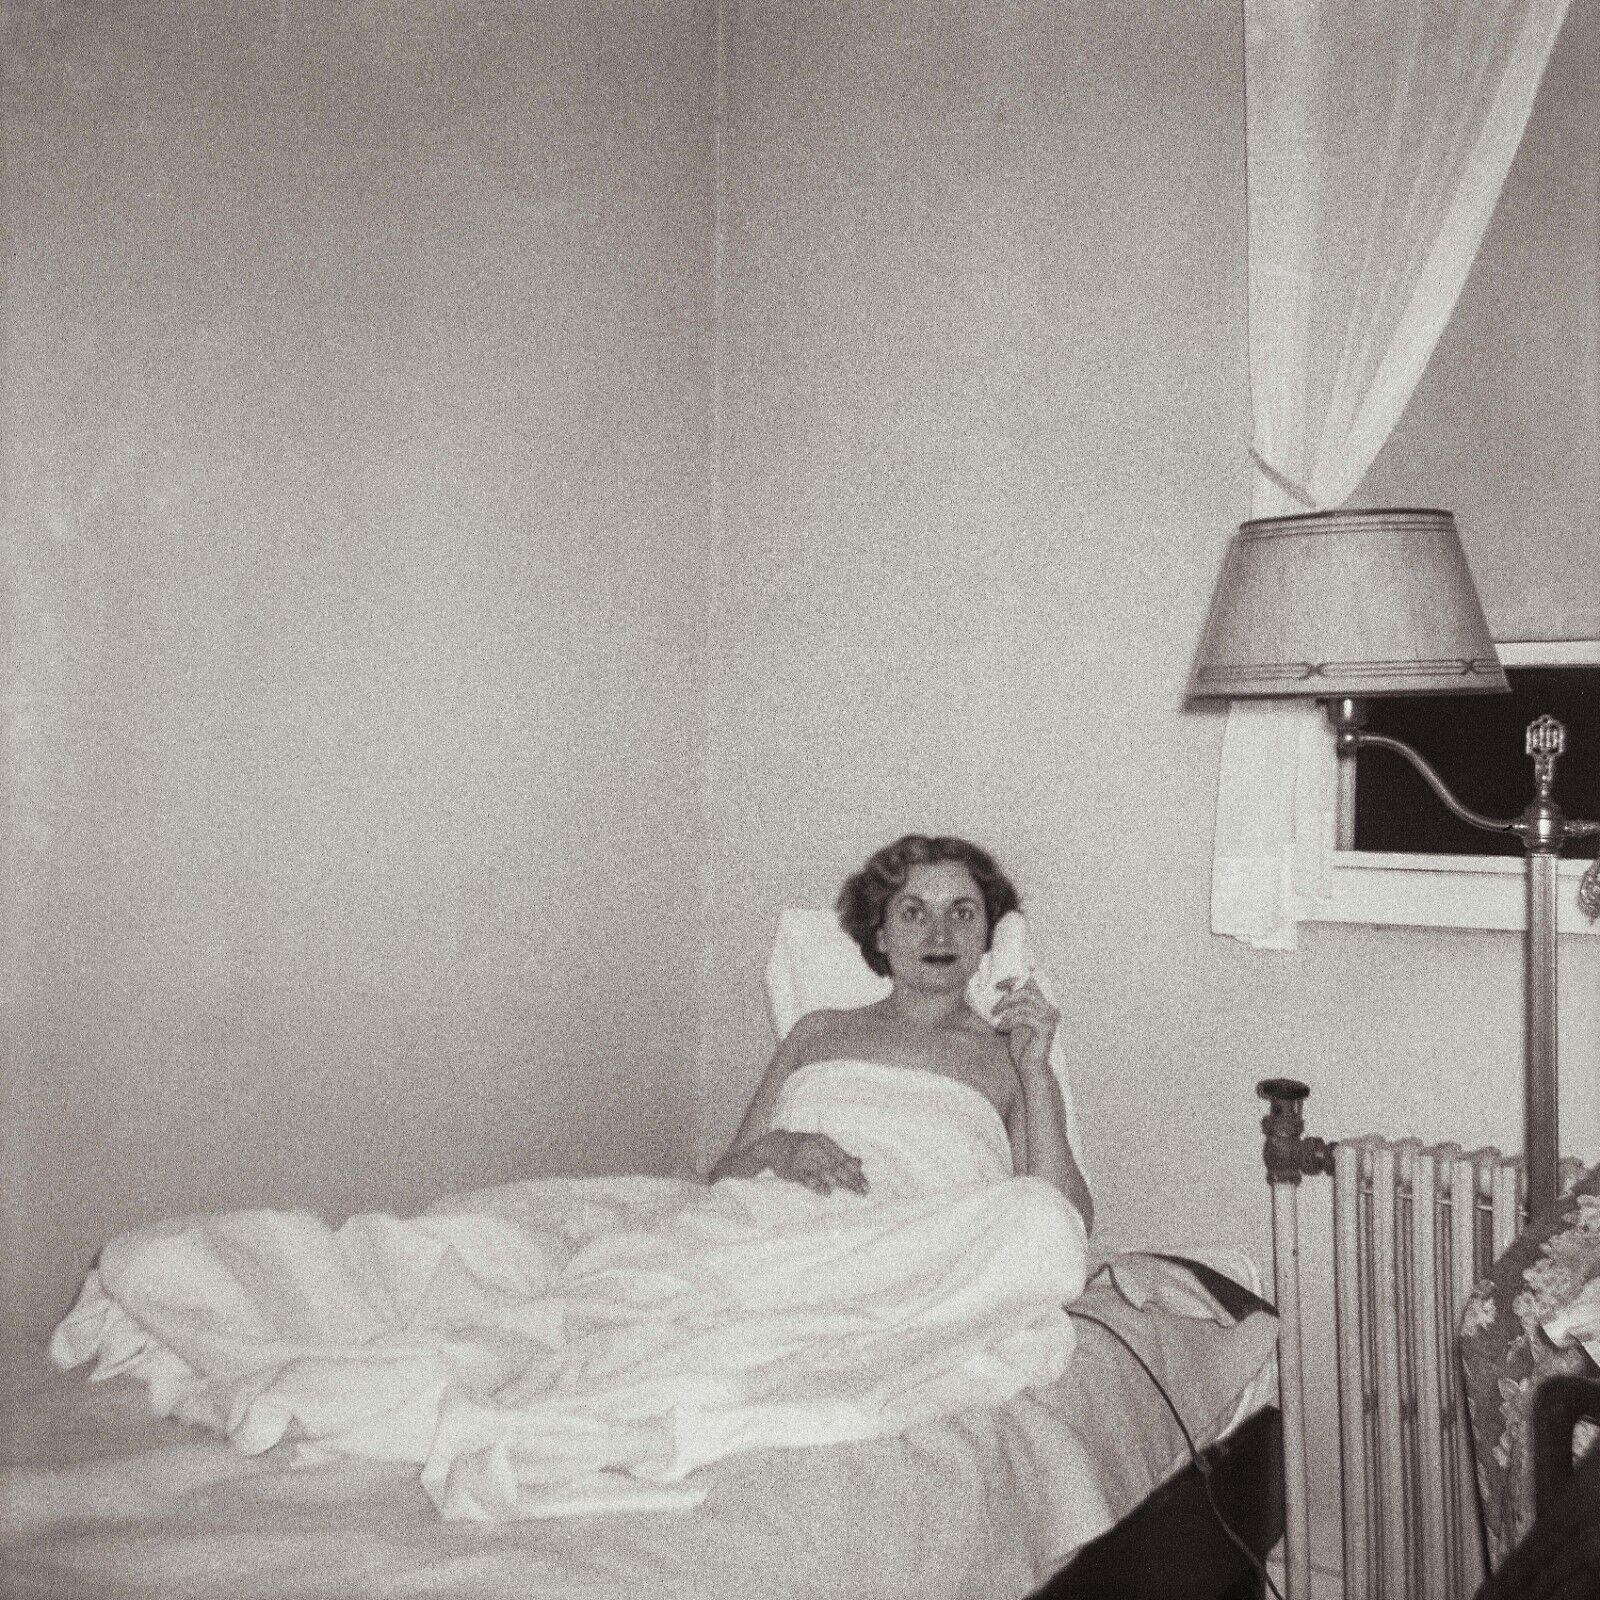 Smoking In Bed After Sex Photo 1950s Undressed Lady Under Sheets Found Snapshot